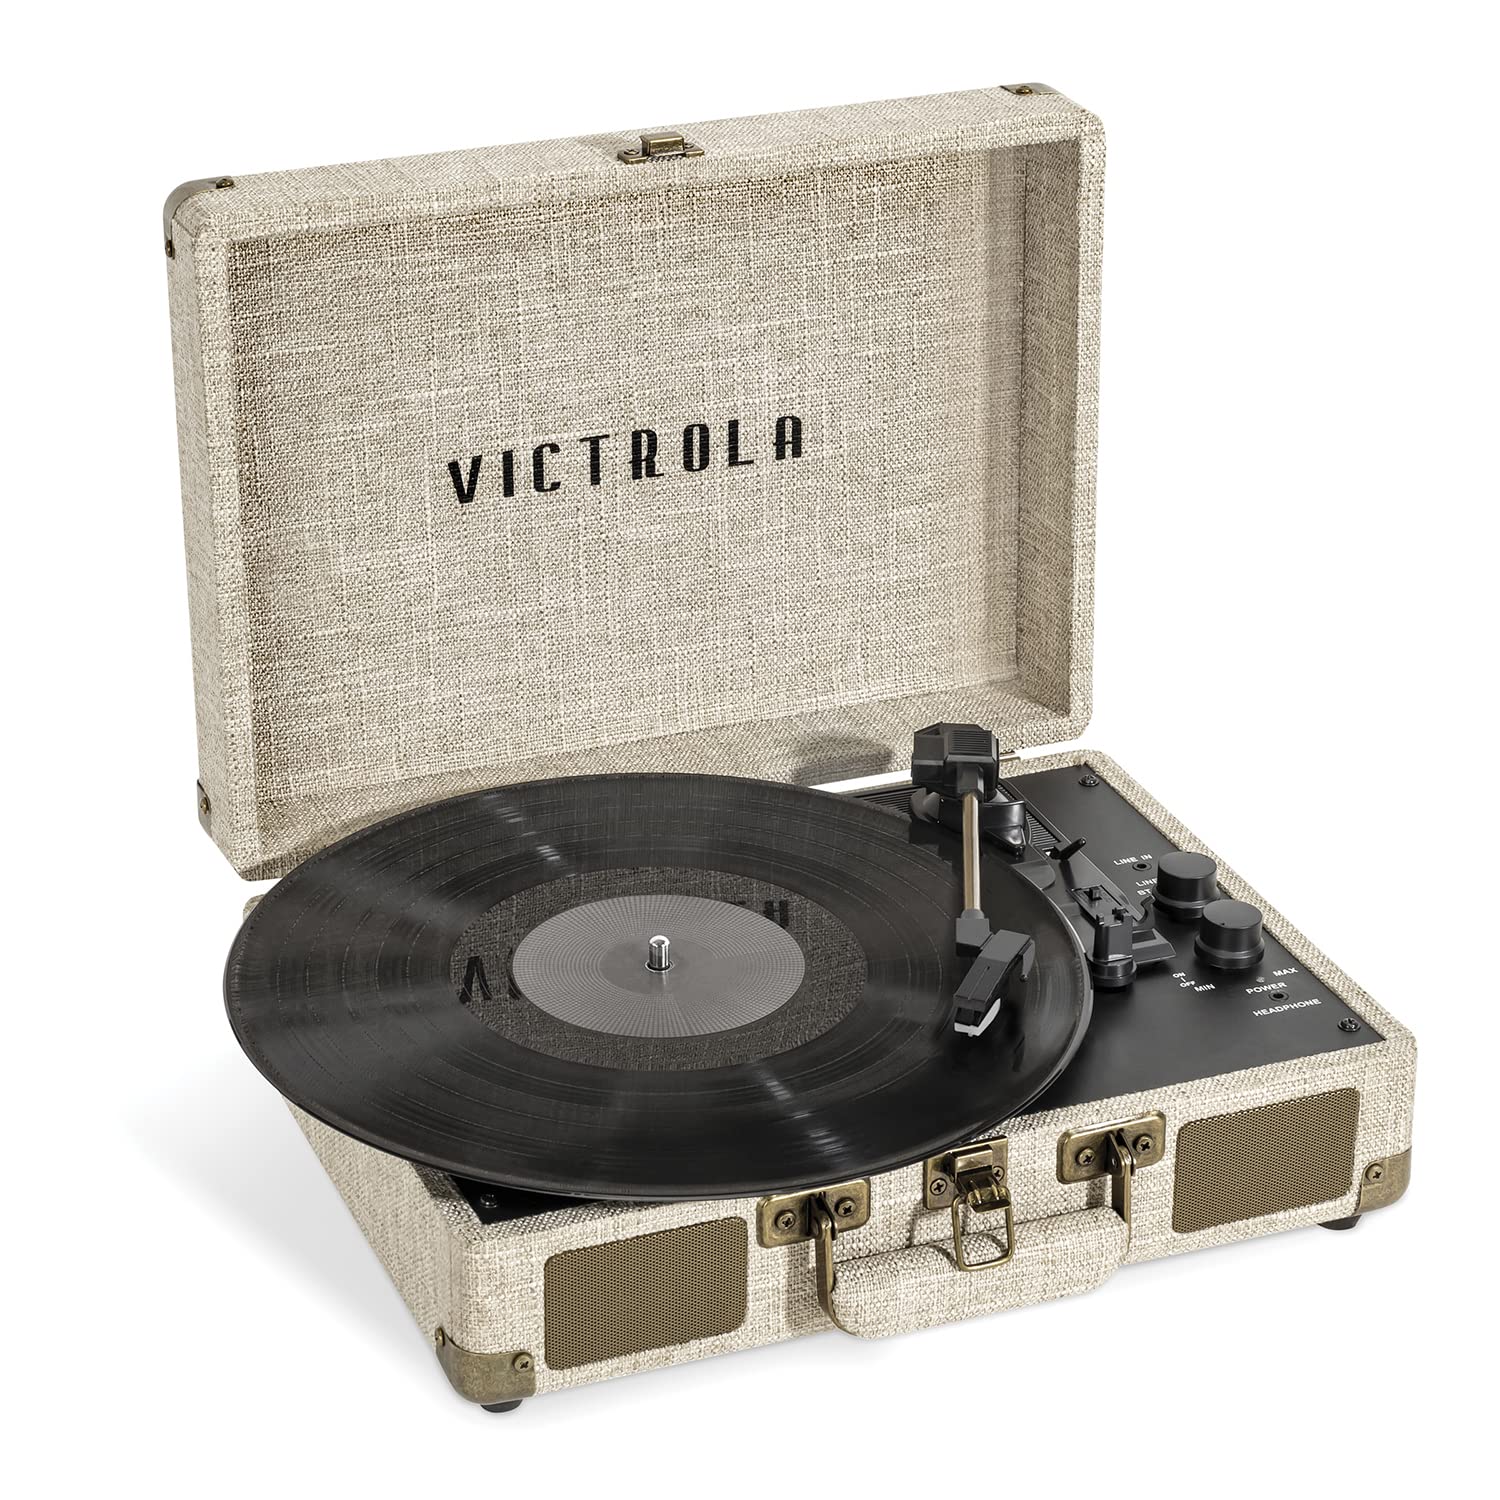 Victrola Journey+ Signature Turntable Record Player – 33-1/3, 45 & 78 RPM Suitcase Vinyl Record Player, Bluetooth Connectivity & Built-in Speakers, Stereo RCA Output, Linen Finish, Cream